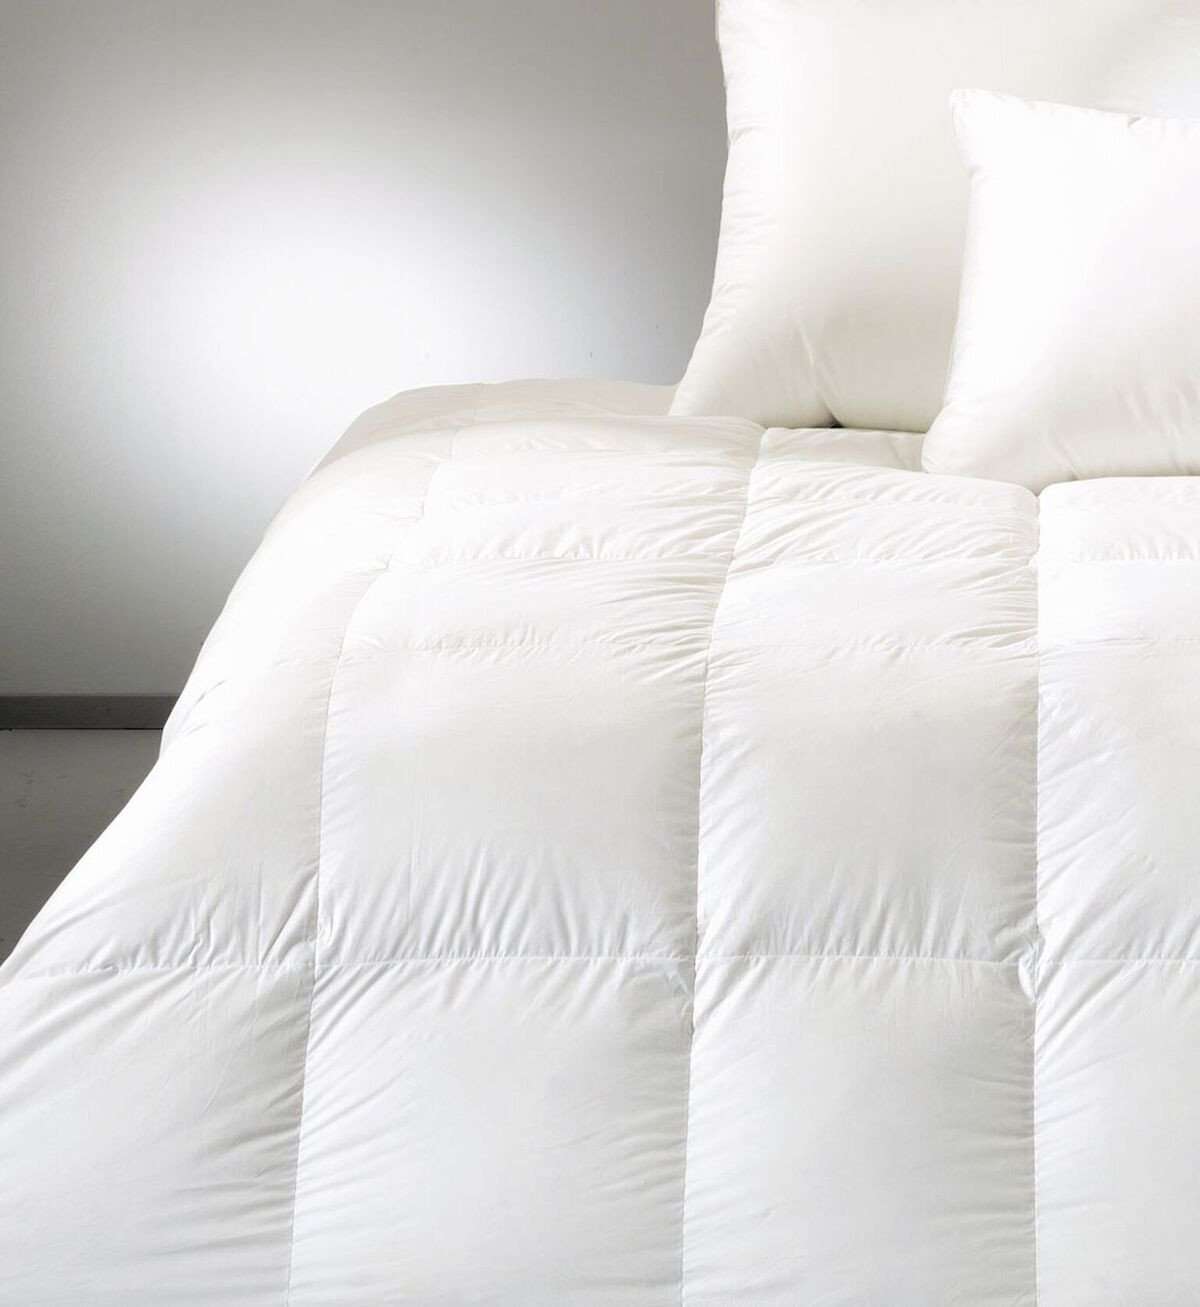 World's Finest Down Comforters by Seventh Heaven